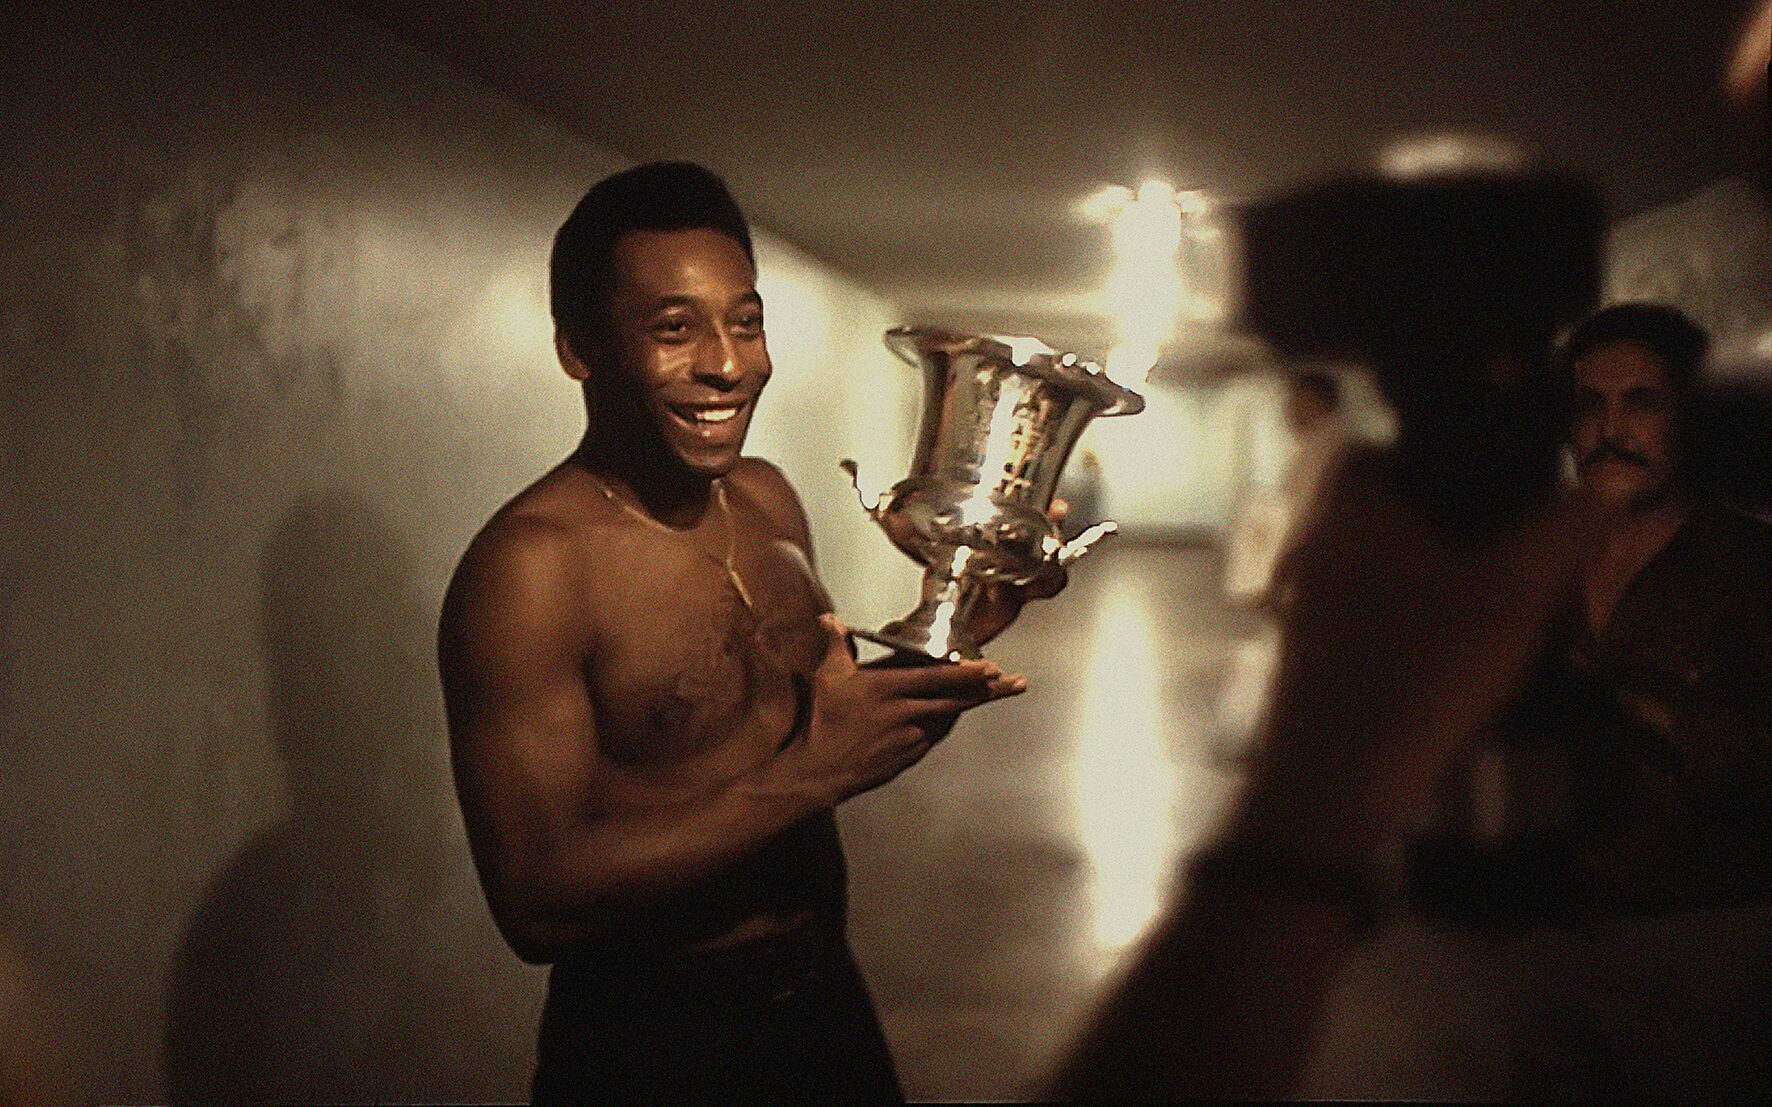 Brazilian footballer Pelé of New York Cosmos poses with a trophy in 1977. (Photo by 4Imagens/Getty Images)